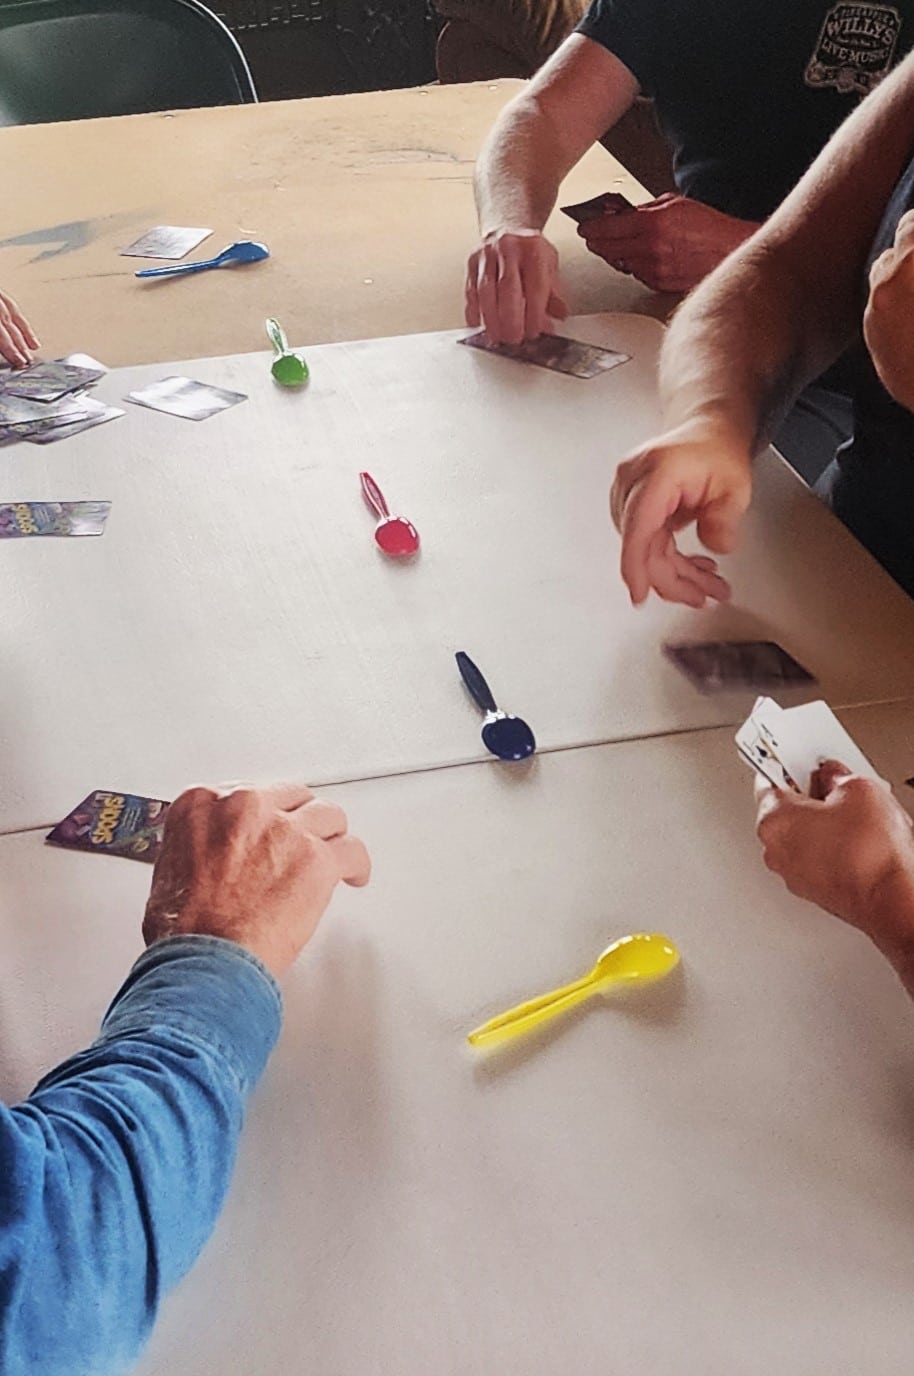 Are you looking for a game that is super easy and everyone can play? This simple card party game is ALWAYS a huge hit and you can play it with any size group! via @crisgoode